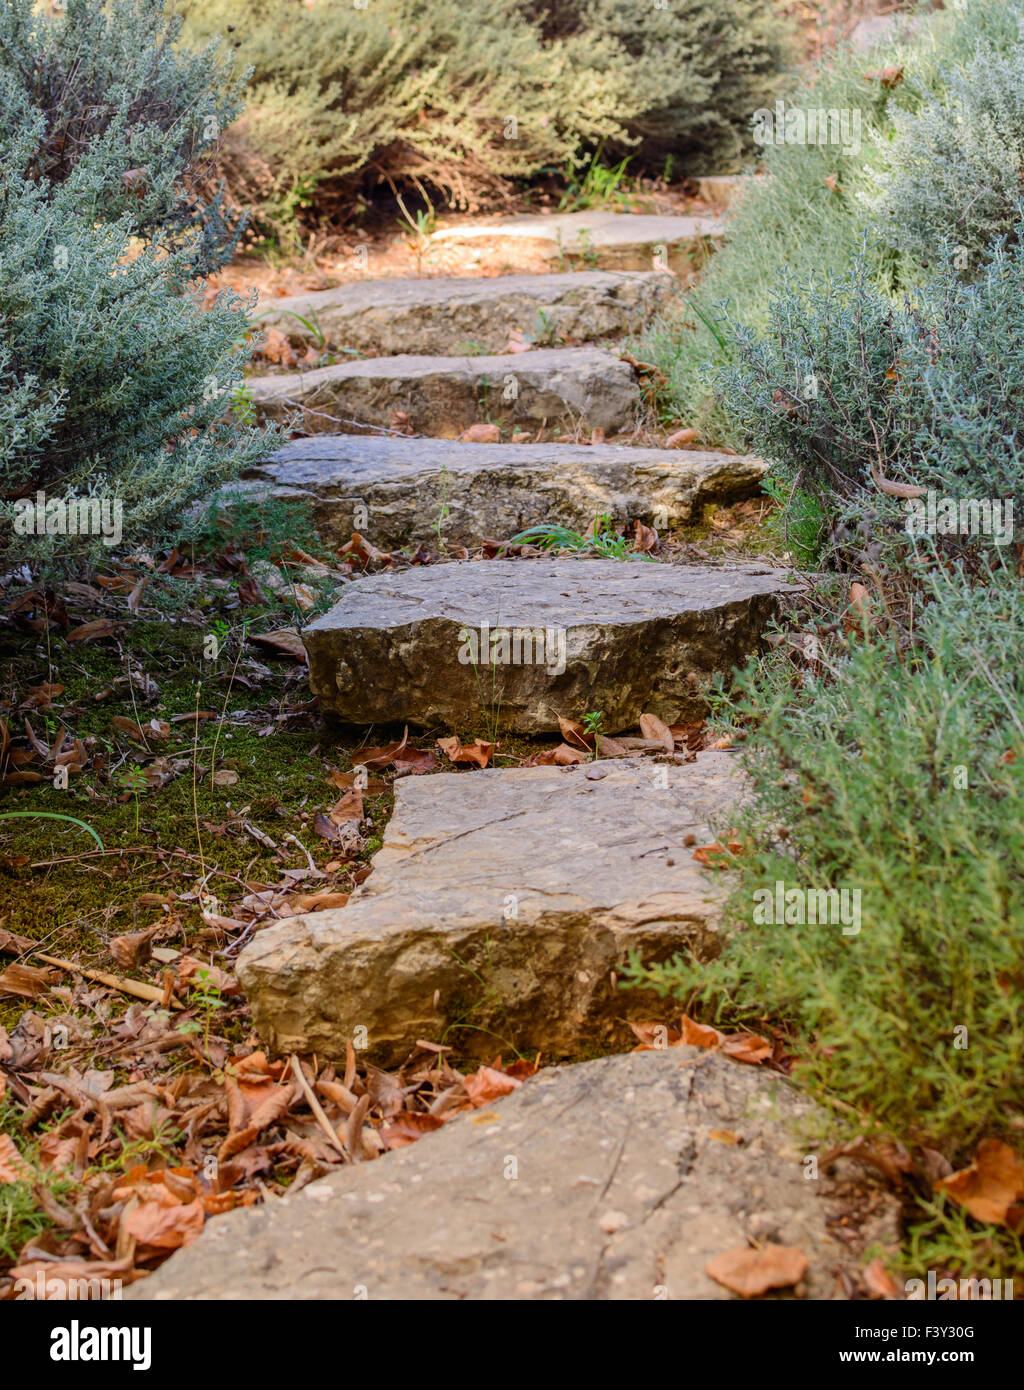 Garden path with slabs of rock Stock Photo